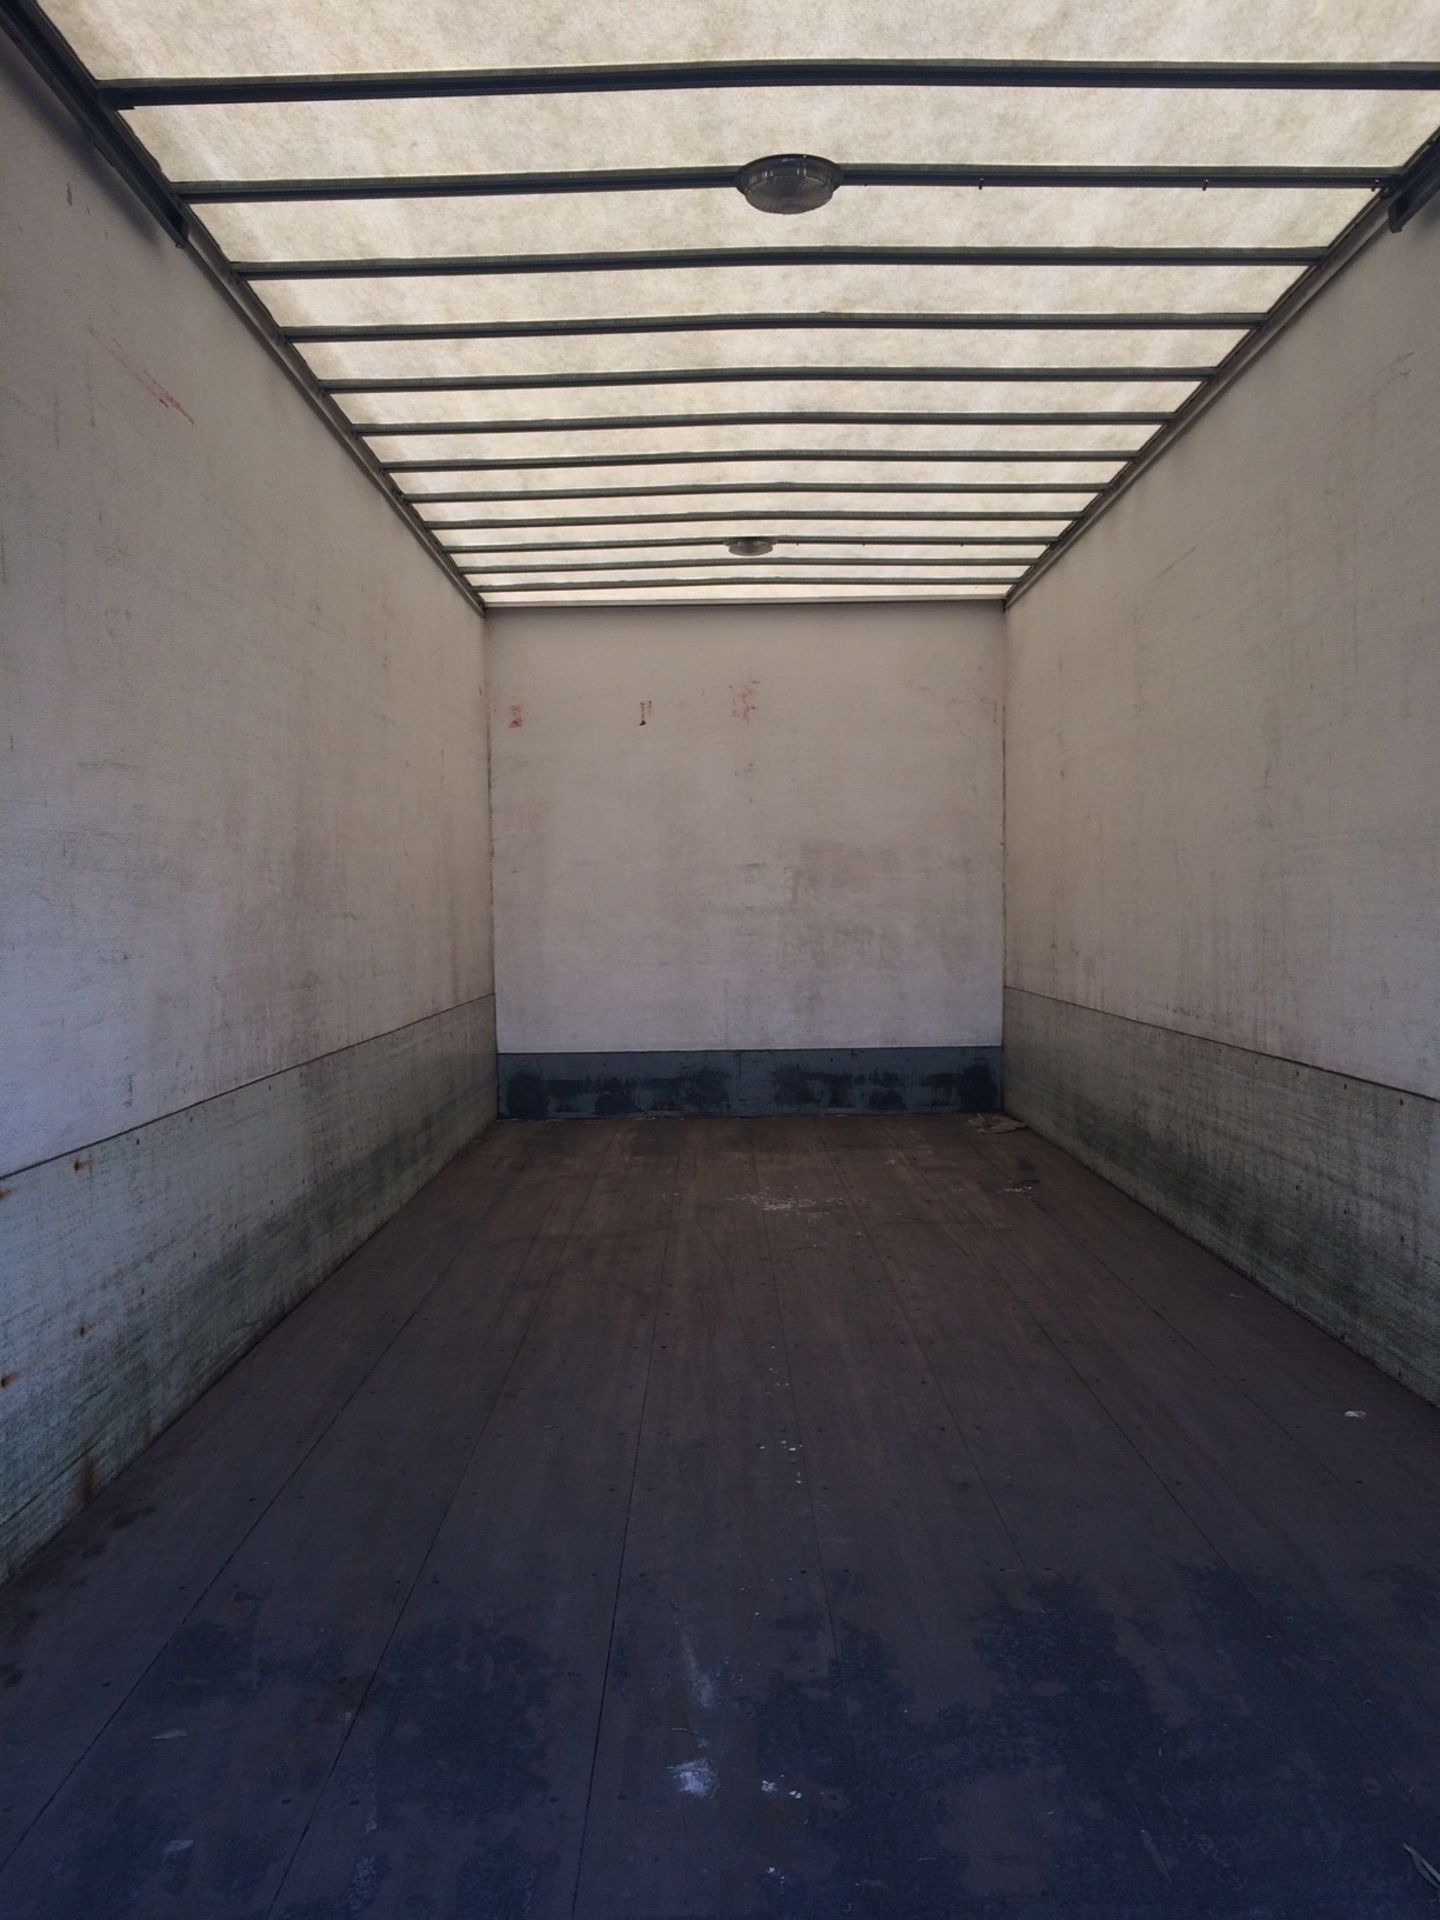 2007 Freight Truck, Model CL112, Straight Body 24ft with Rail, Lift Gate 6600lb cap. - Image 11 of 11